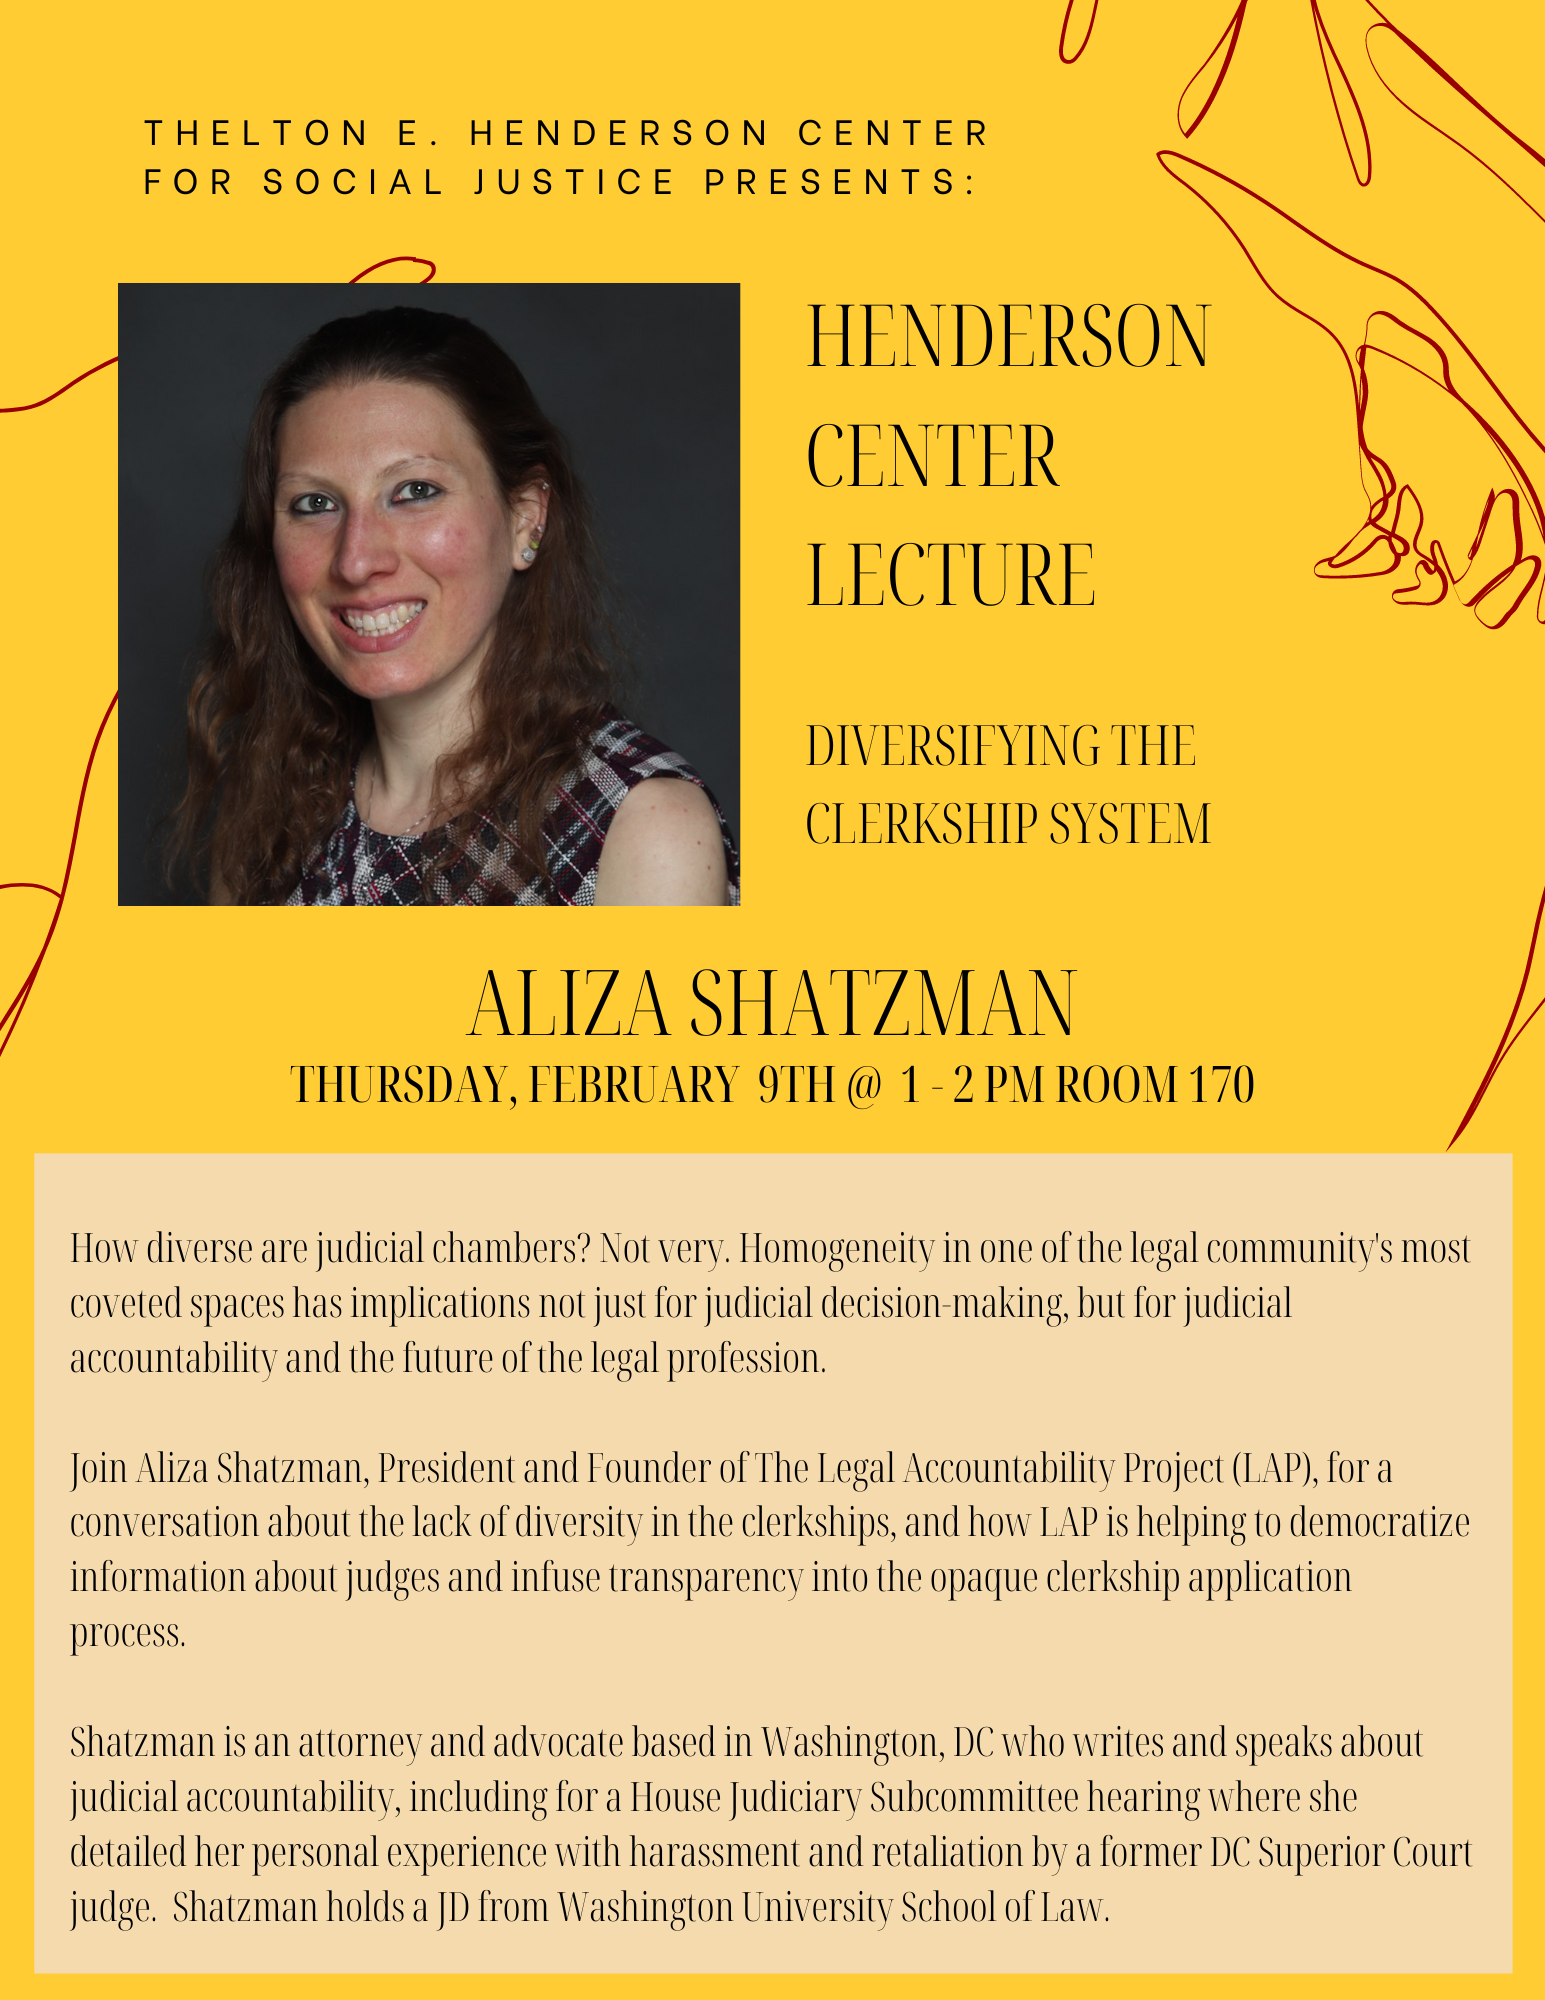 flyer for event on 2/9 with Aliza Shatzman